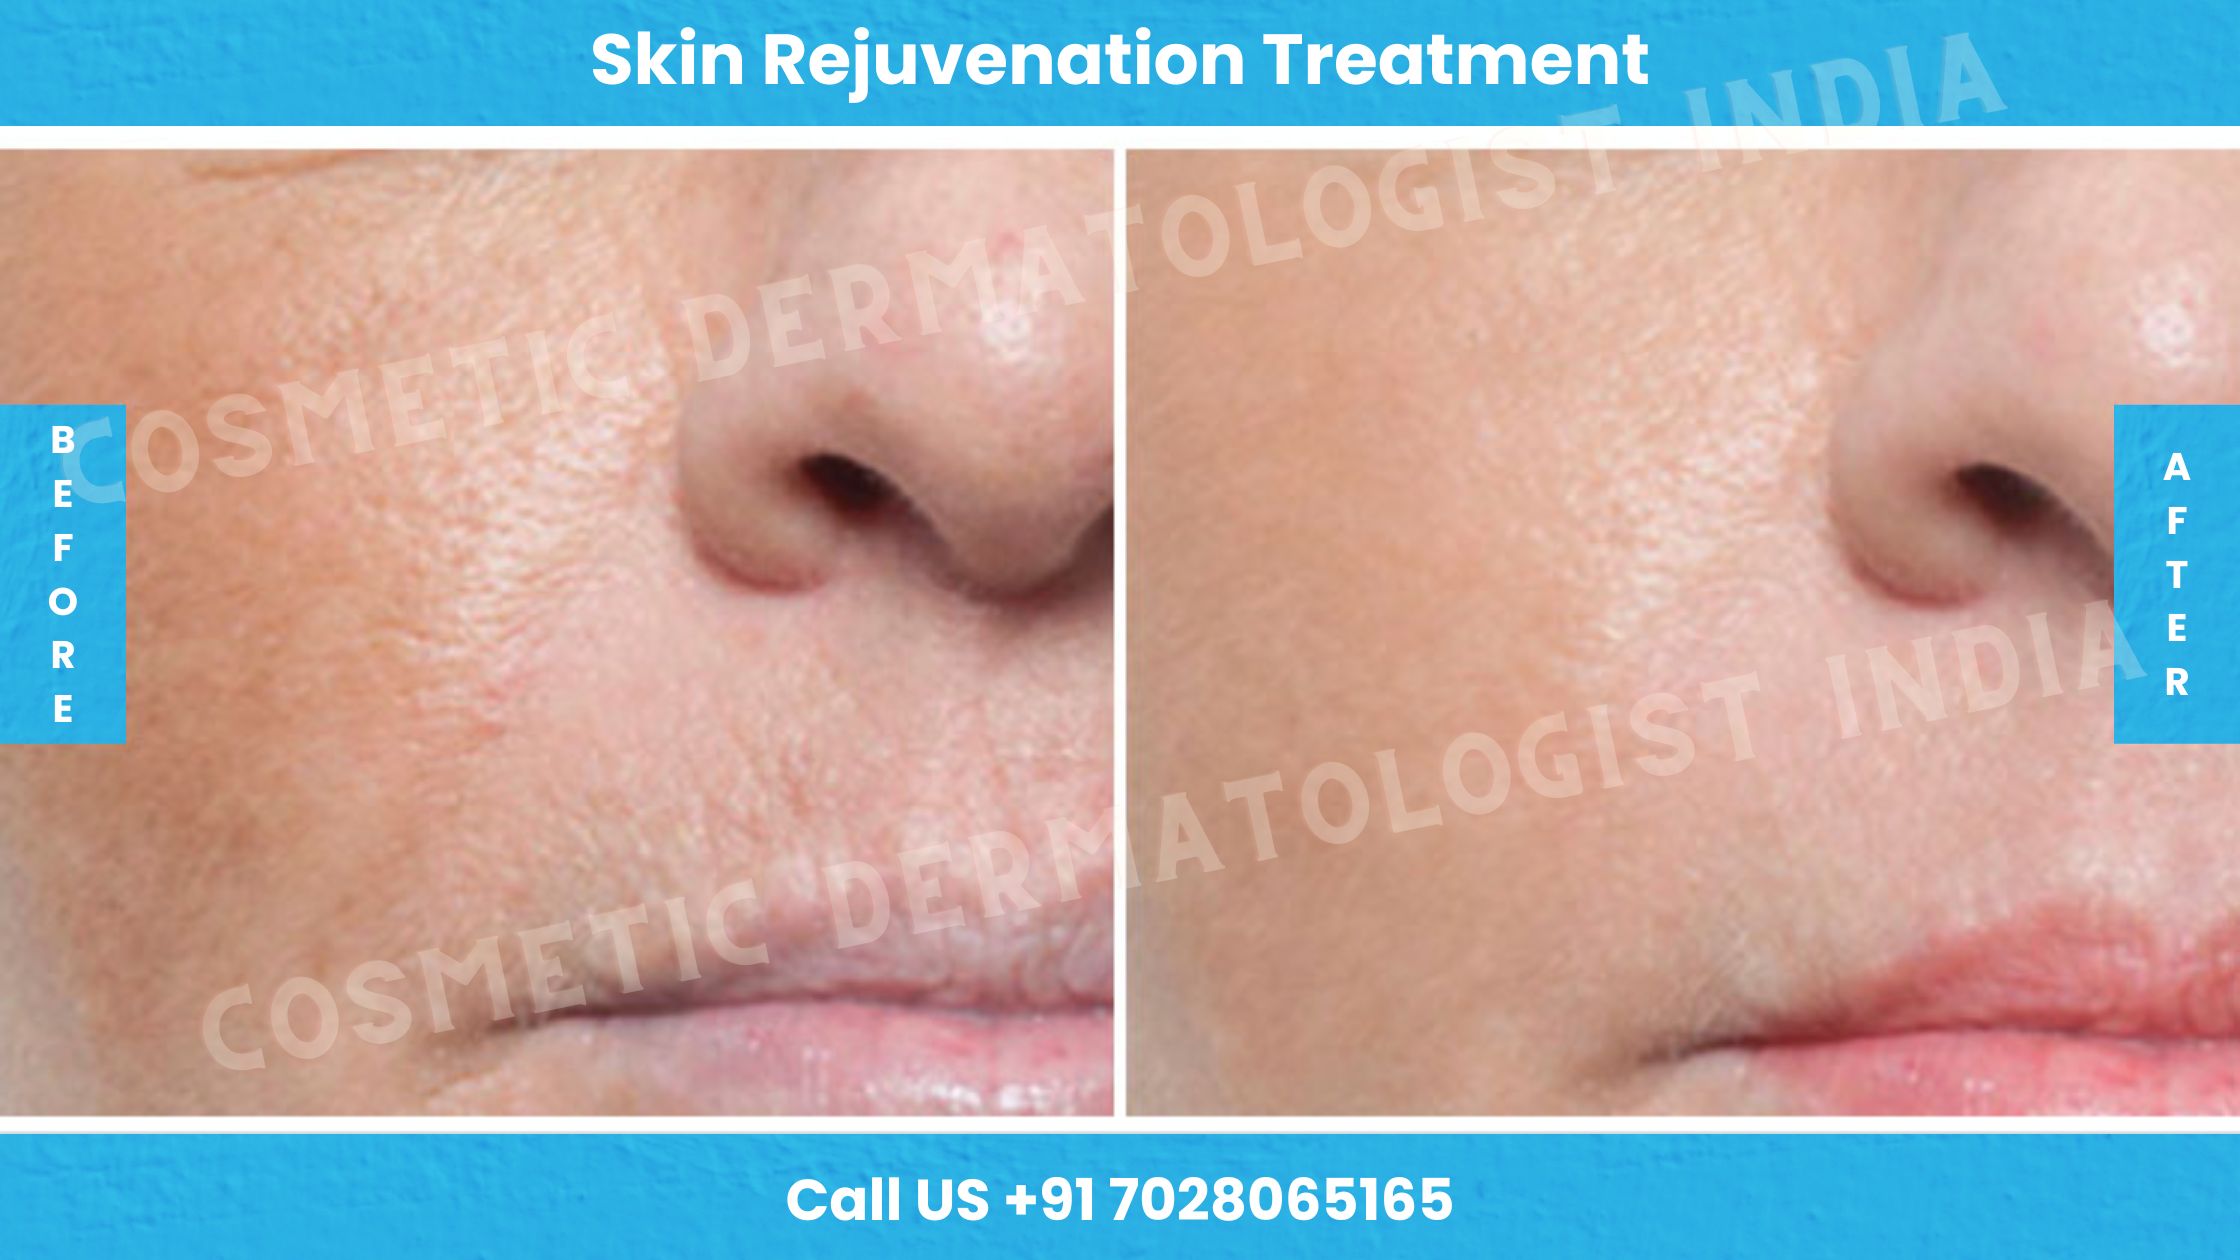 Before and After Images of Skin Rejuvenation Treatment